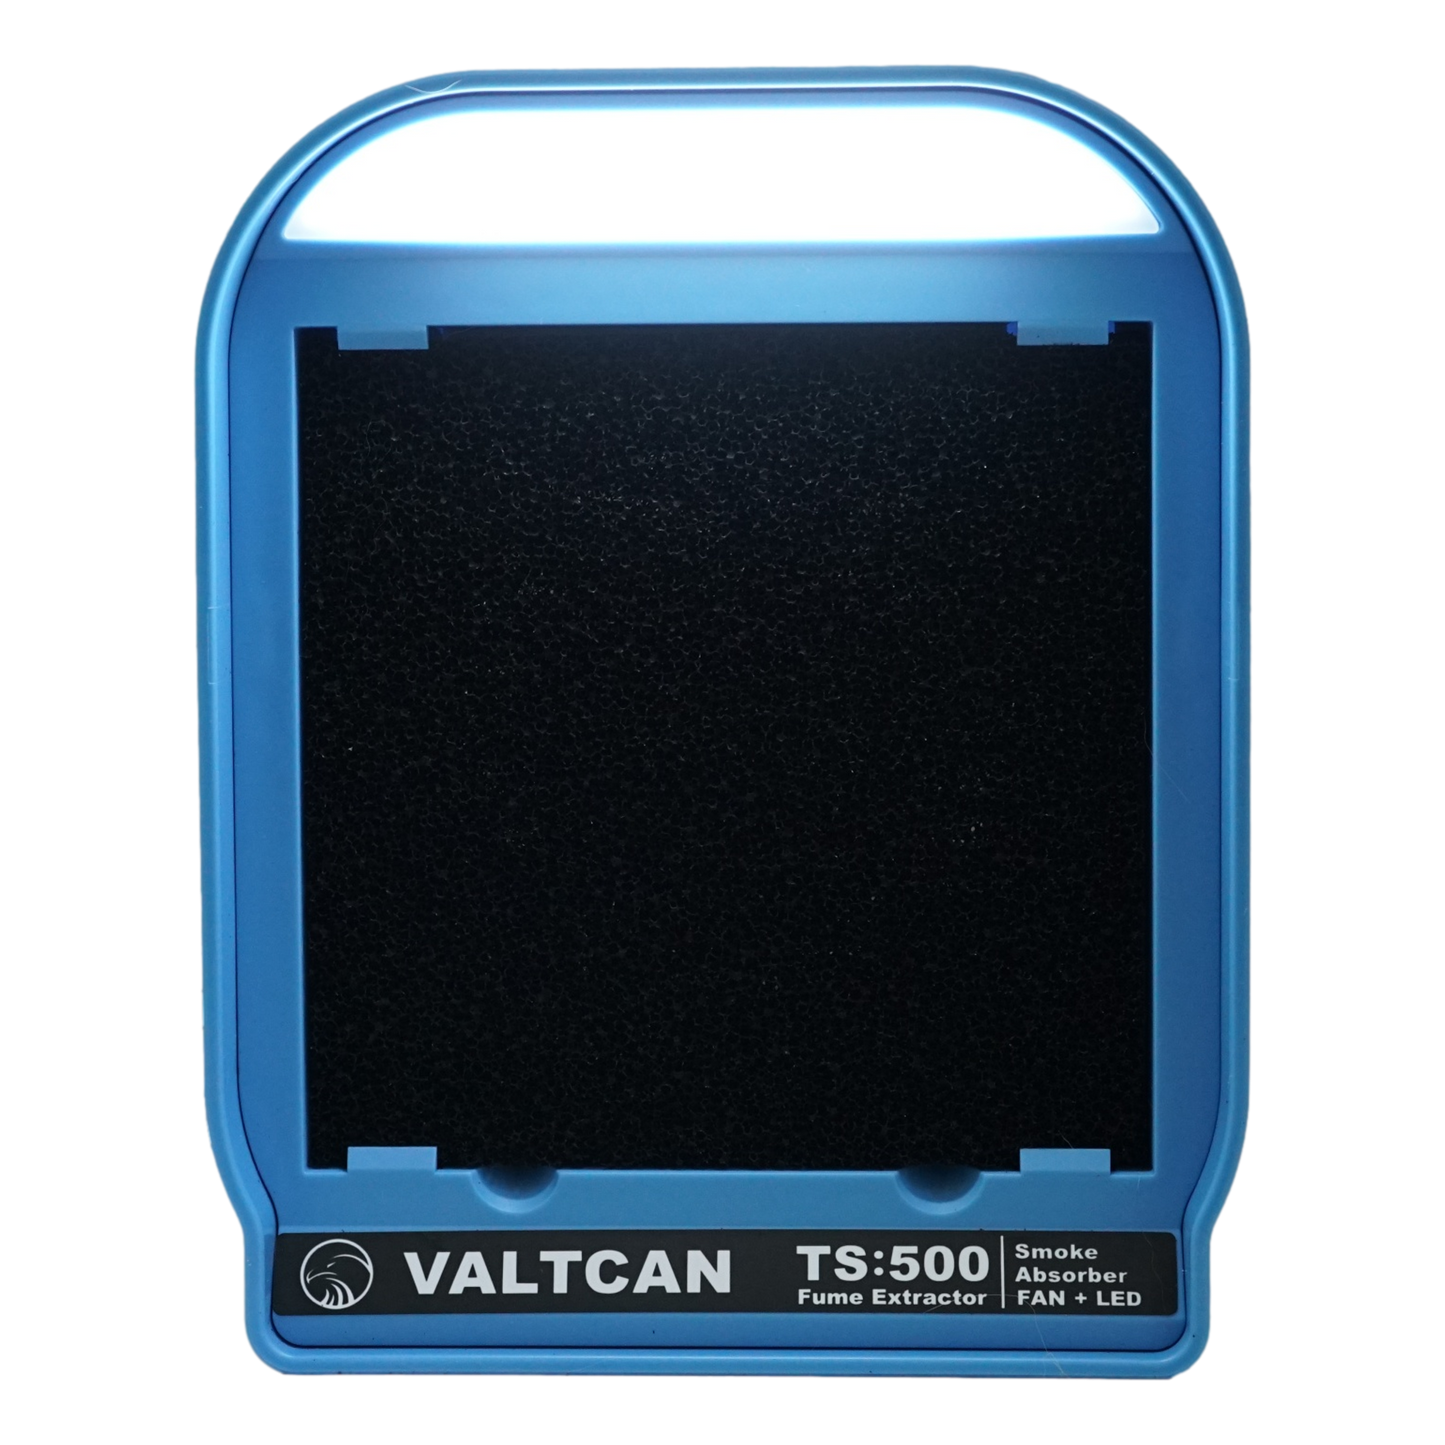 Valtcan TS:500 Fume Extractor Soldering Fan Smoke Absorber with Overhead LED Light Lamp